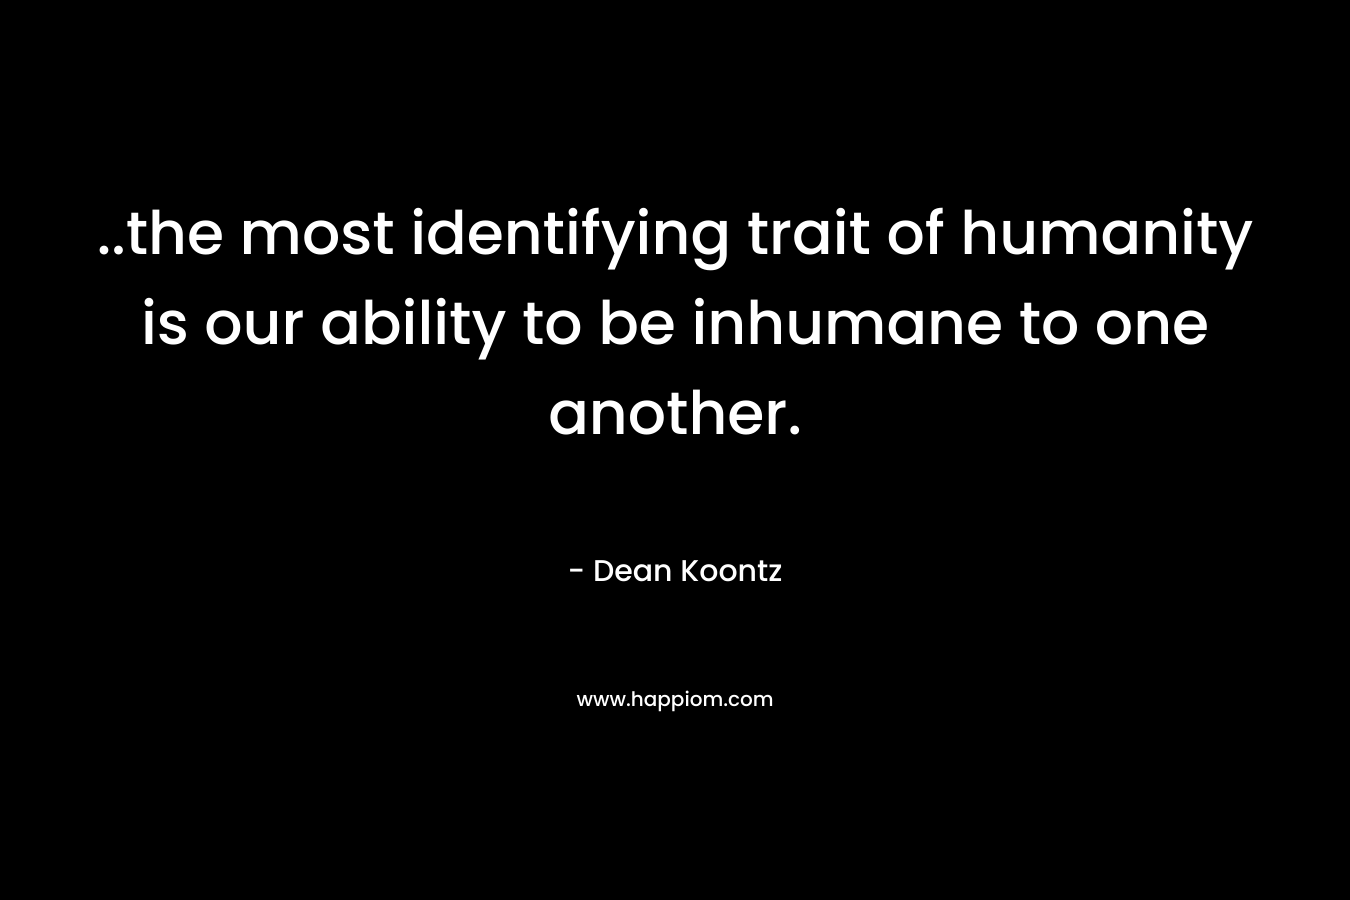 ..the most identifying trait of humanity is our ability to be inhumane to one another. – Dean Koontz